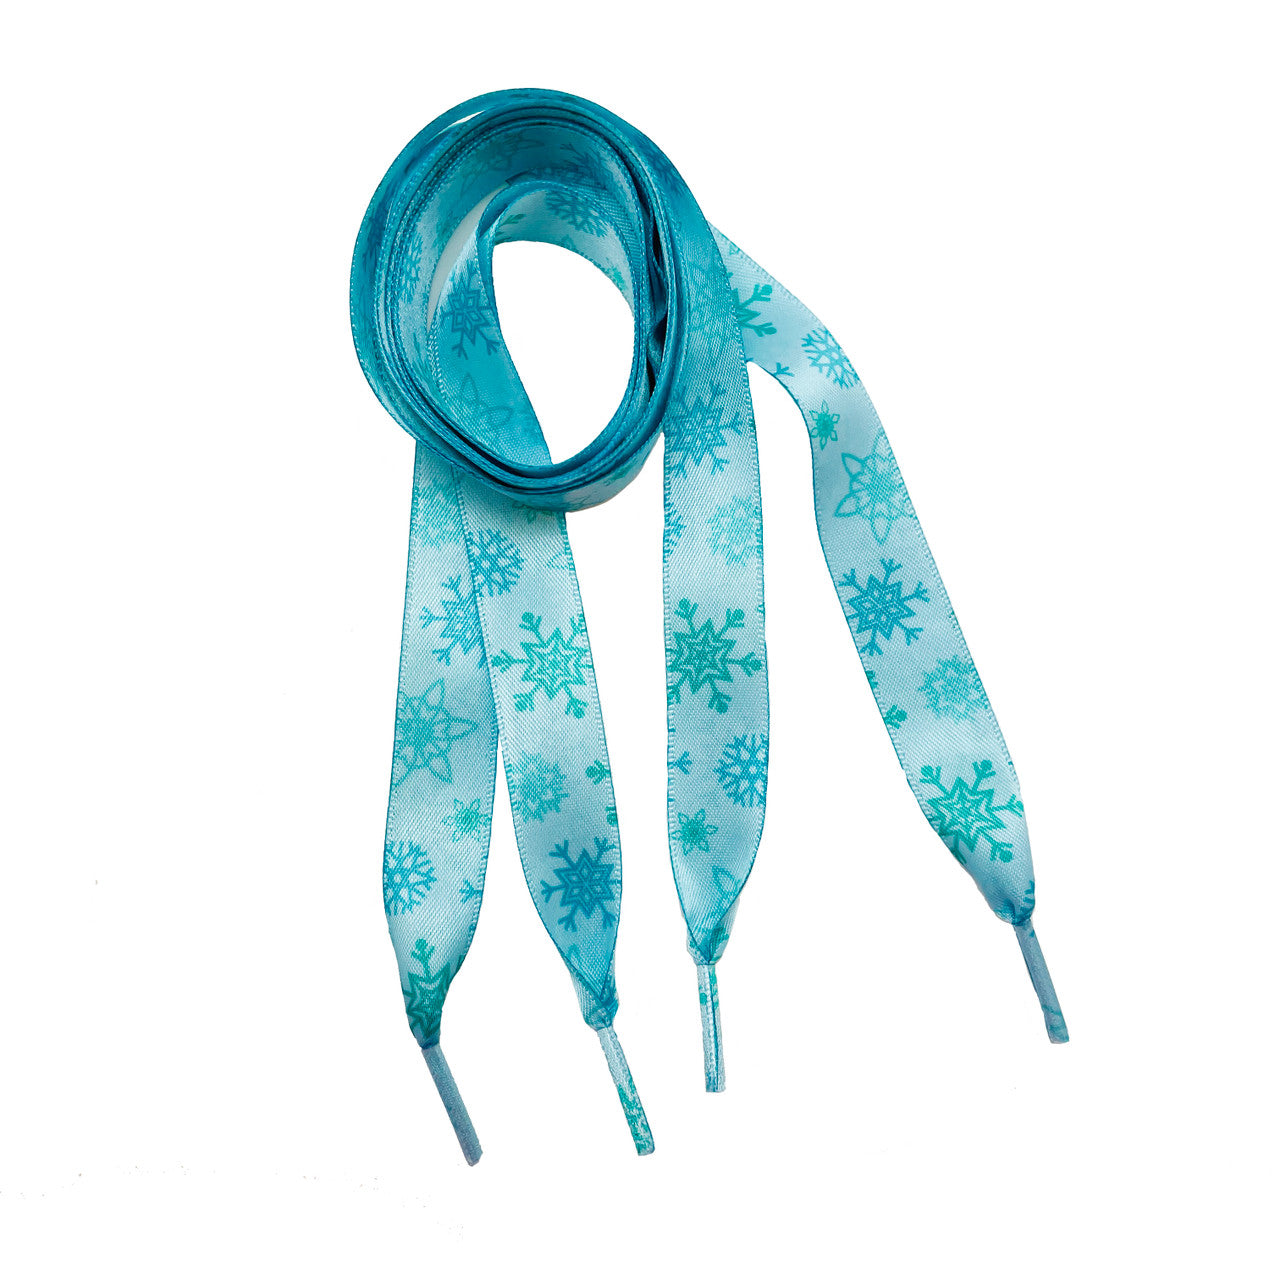 Satin Shoelaces snowflake print ideal for hip hop dance, dance team, sneaker junkie, cheerleading, Frozen theme in 36" and 44" lengths